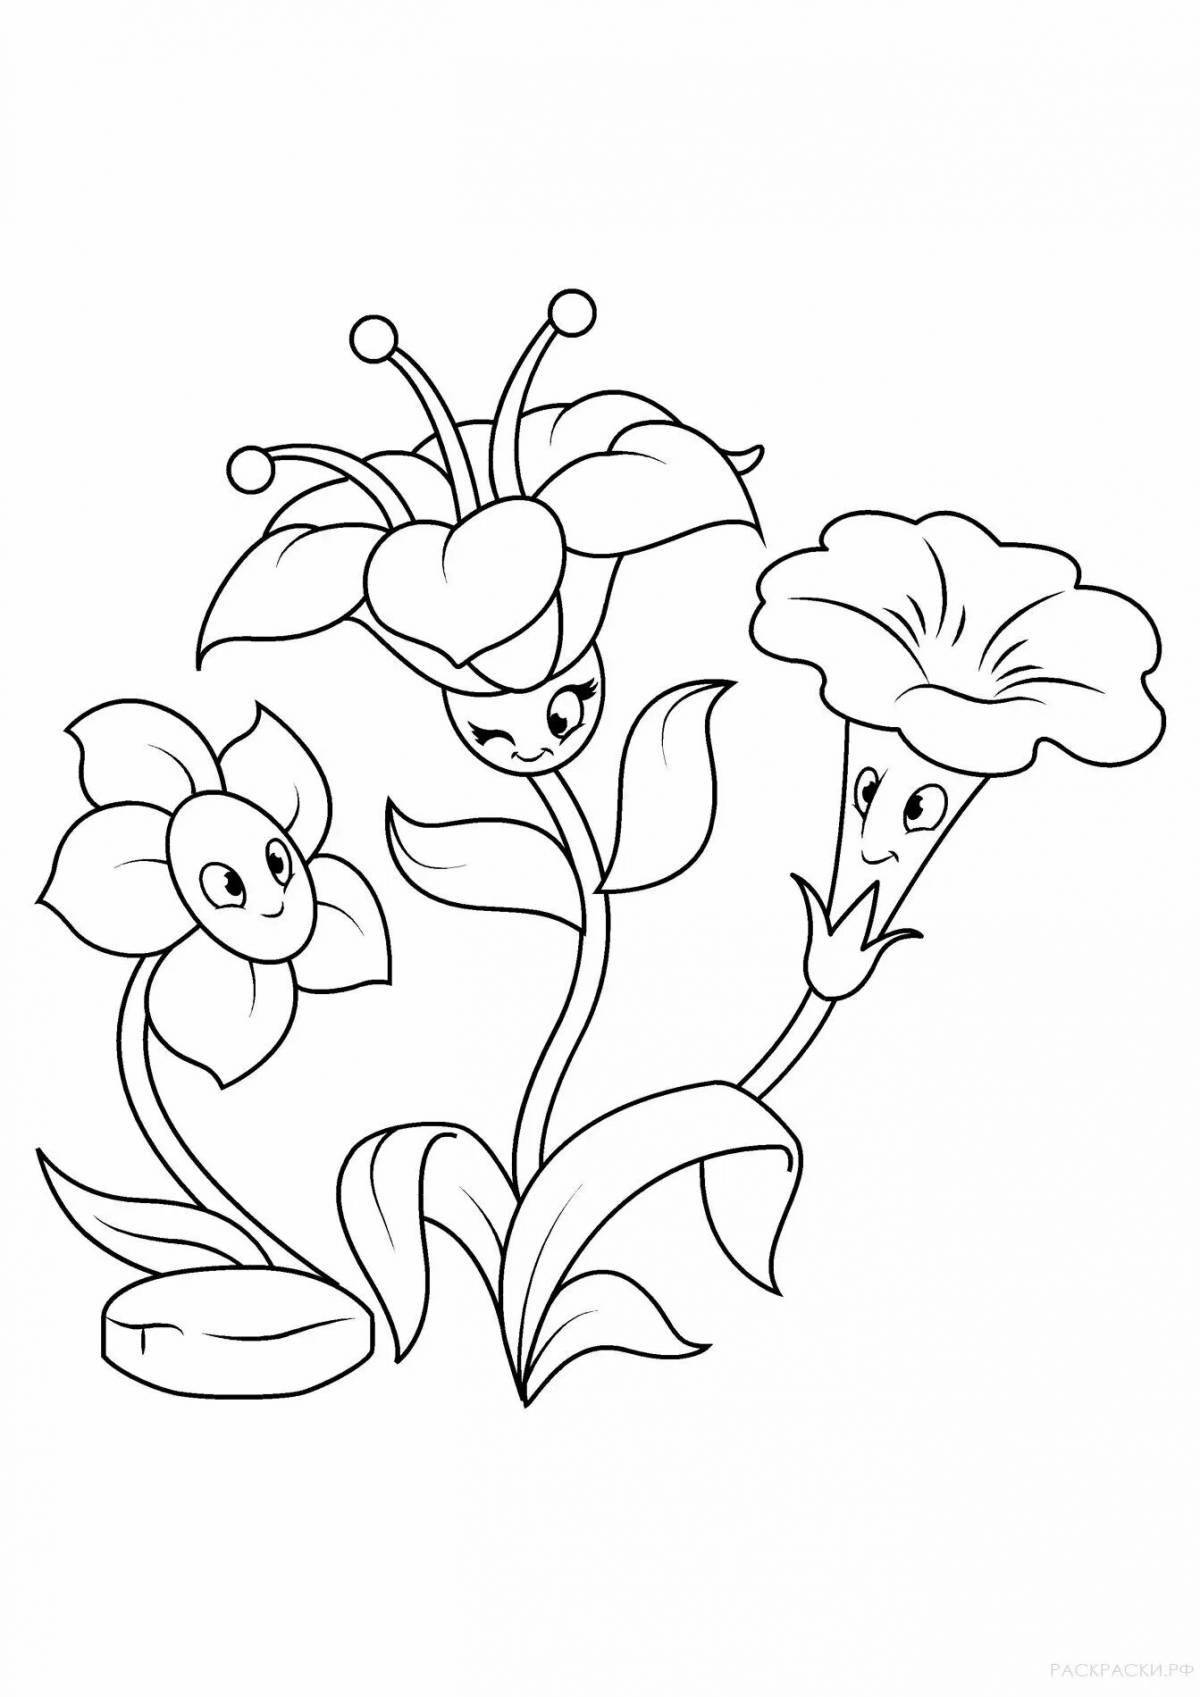 Playful flower drawing for kids